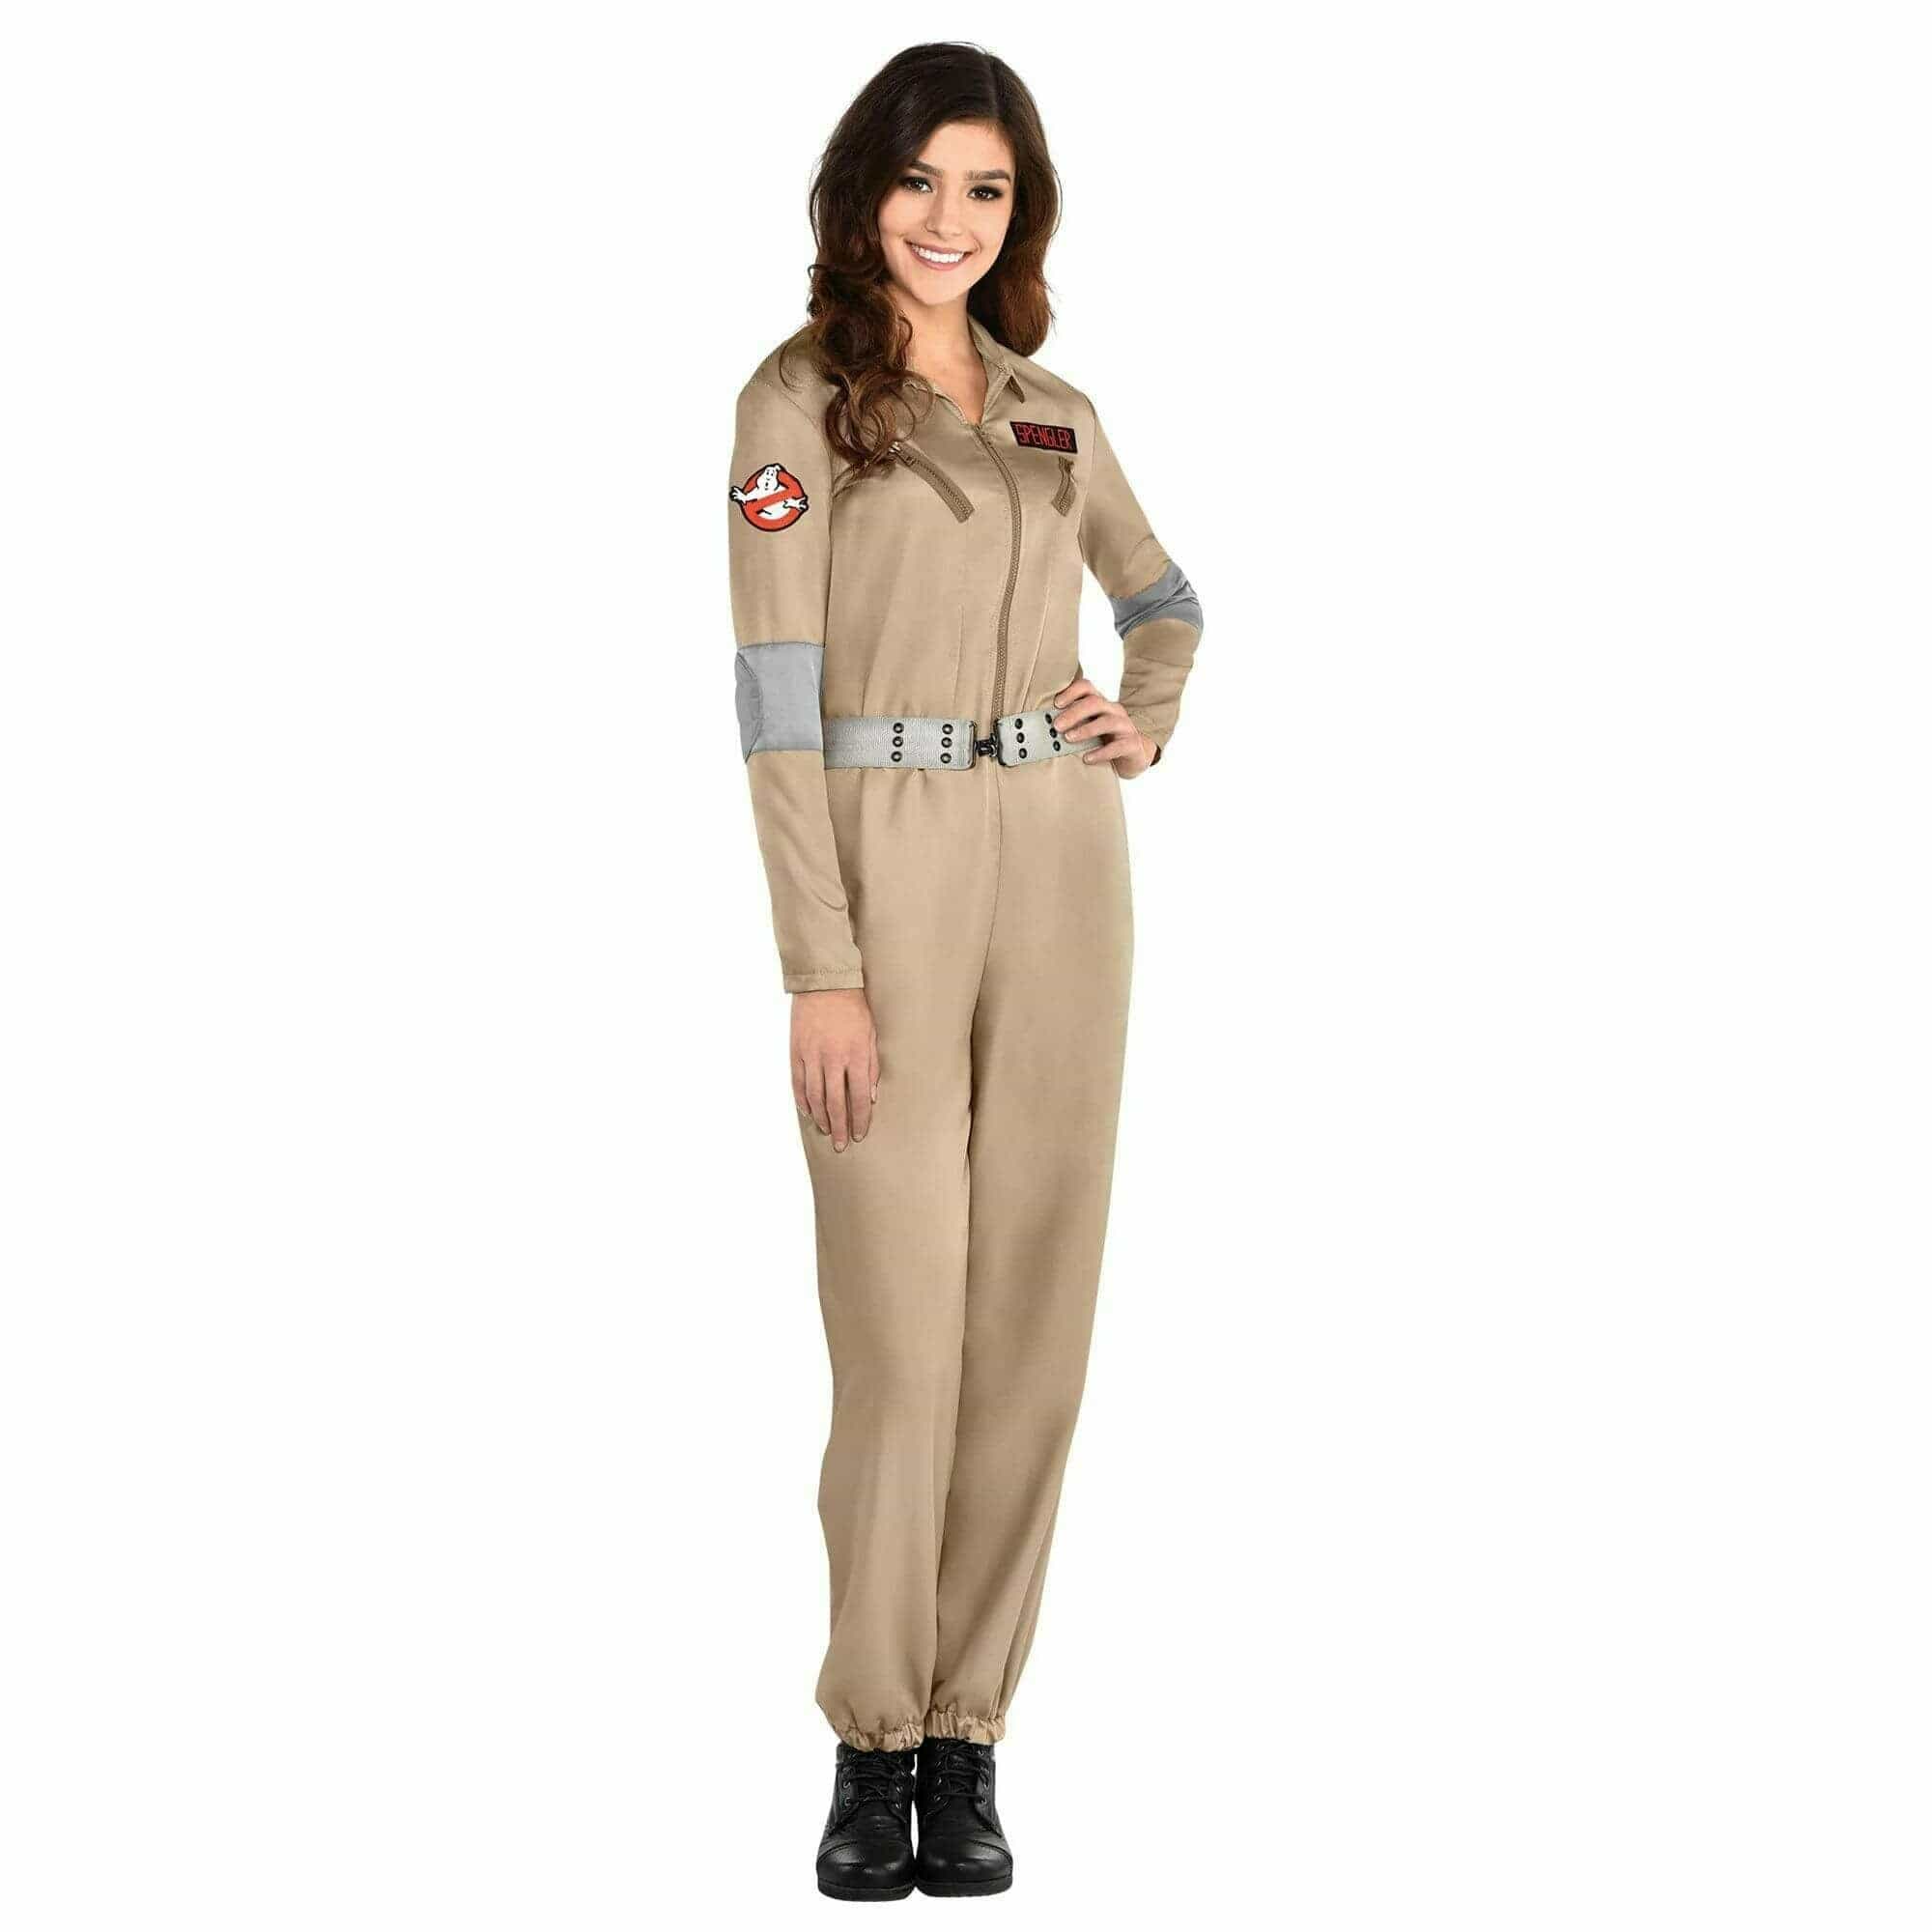 Amscan COSTUMES Medium (6-8) Womens Ghostbusters: Classic Costume